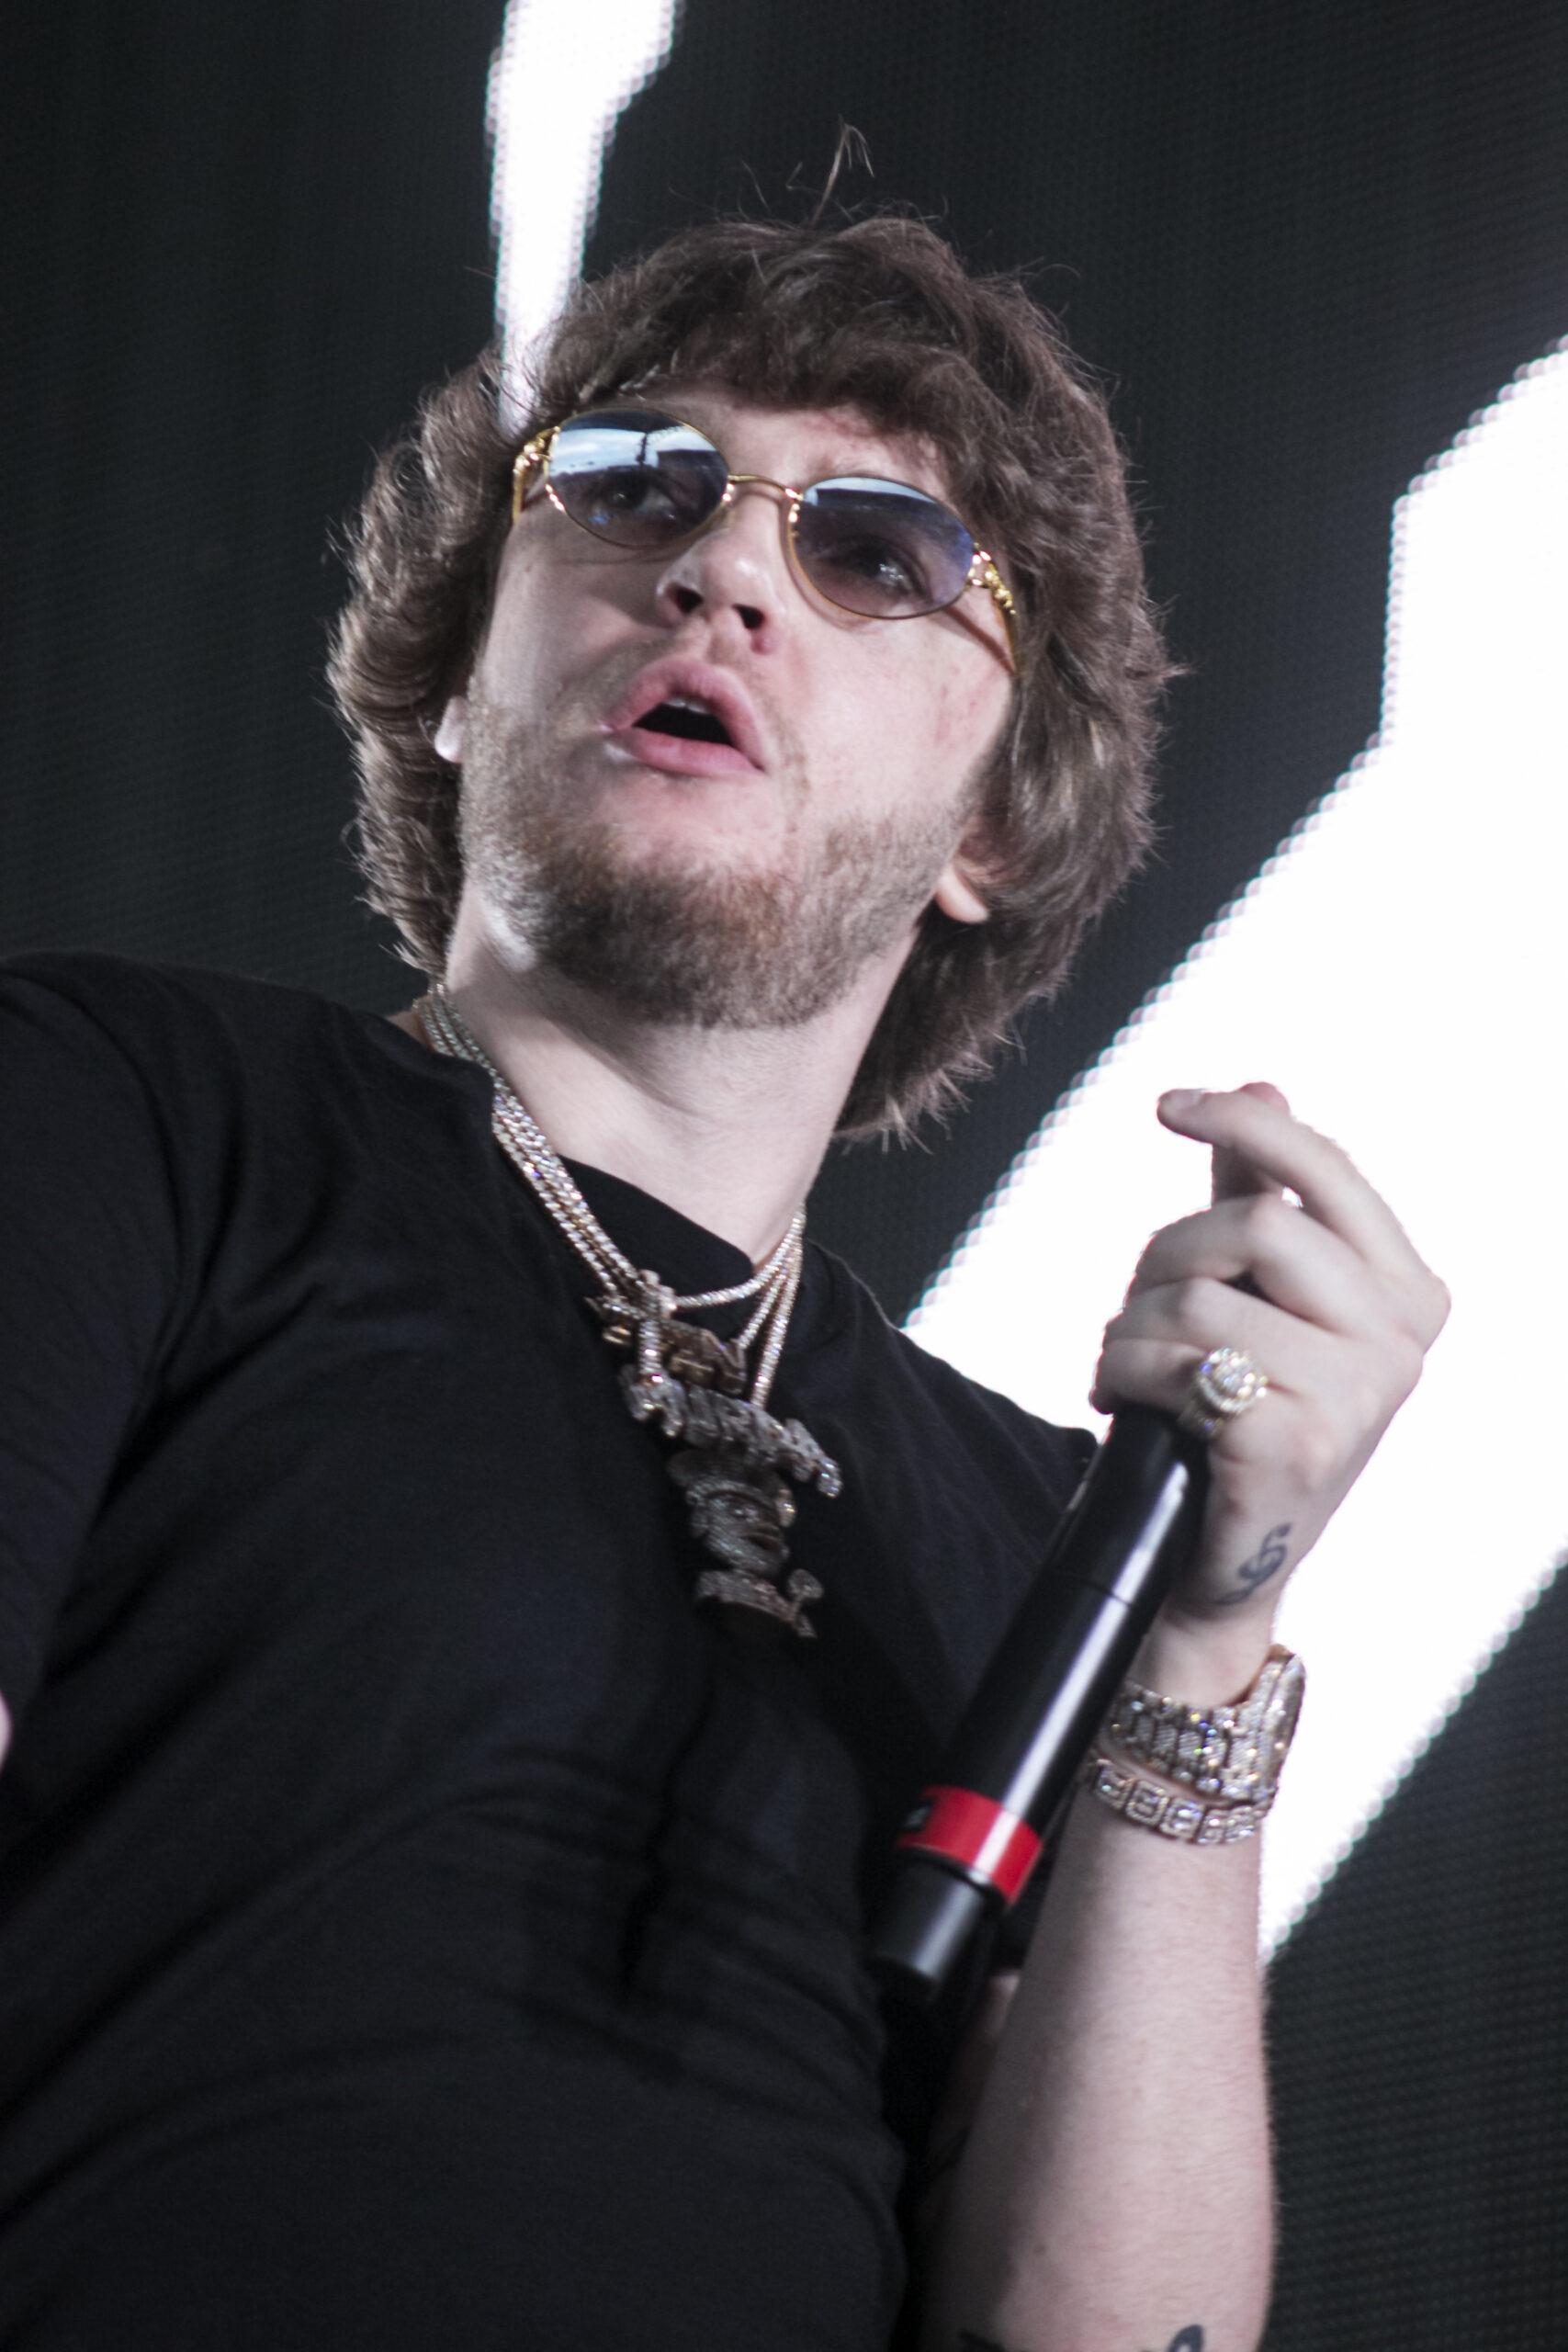 Murda Beatz performs at The Endless Summer Tour in Tampa at the Midflorida Credit Union Amphitheatre. 